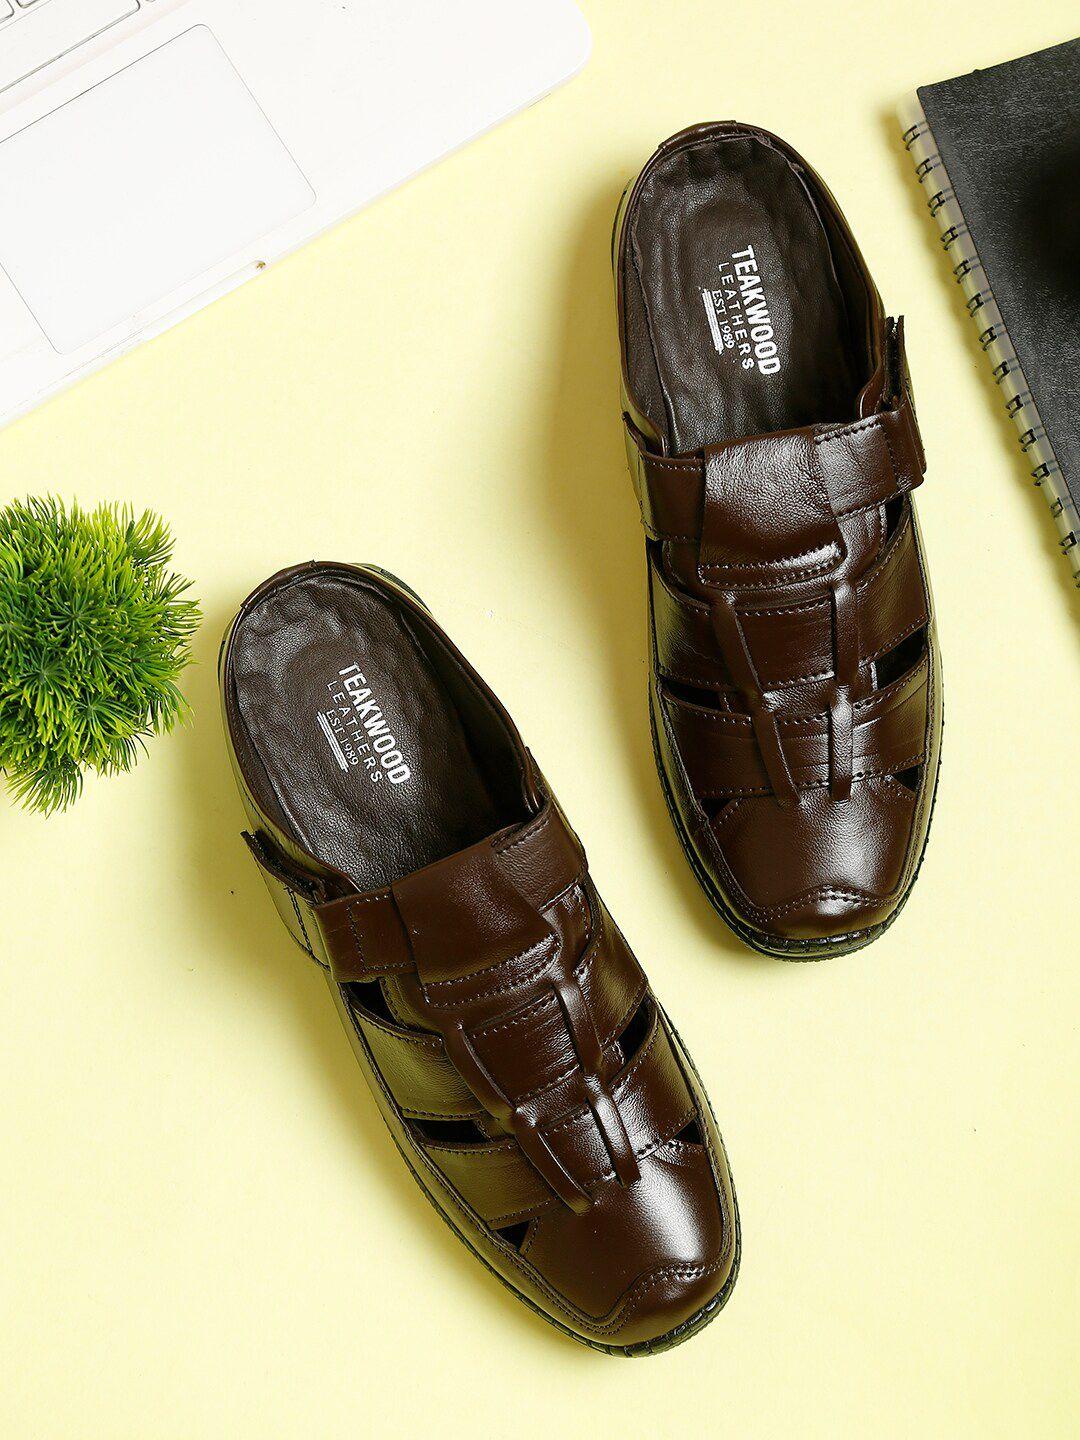 teakwood-leathers-men-brown-leather-shoe-style-sandals